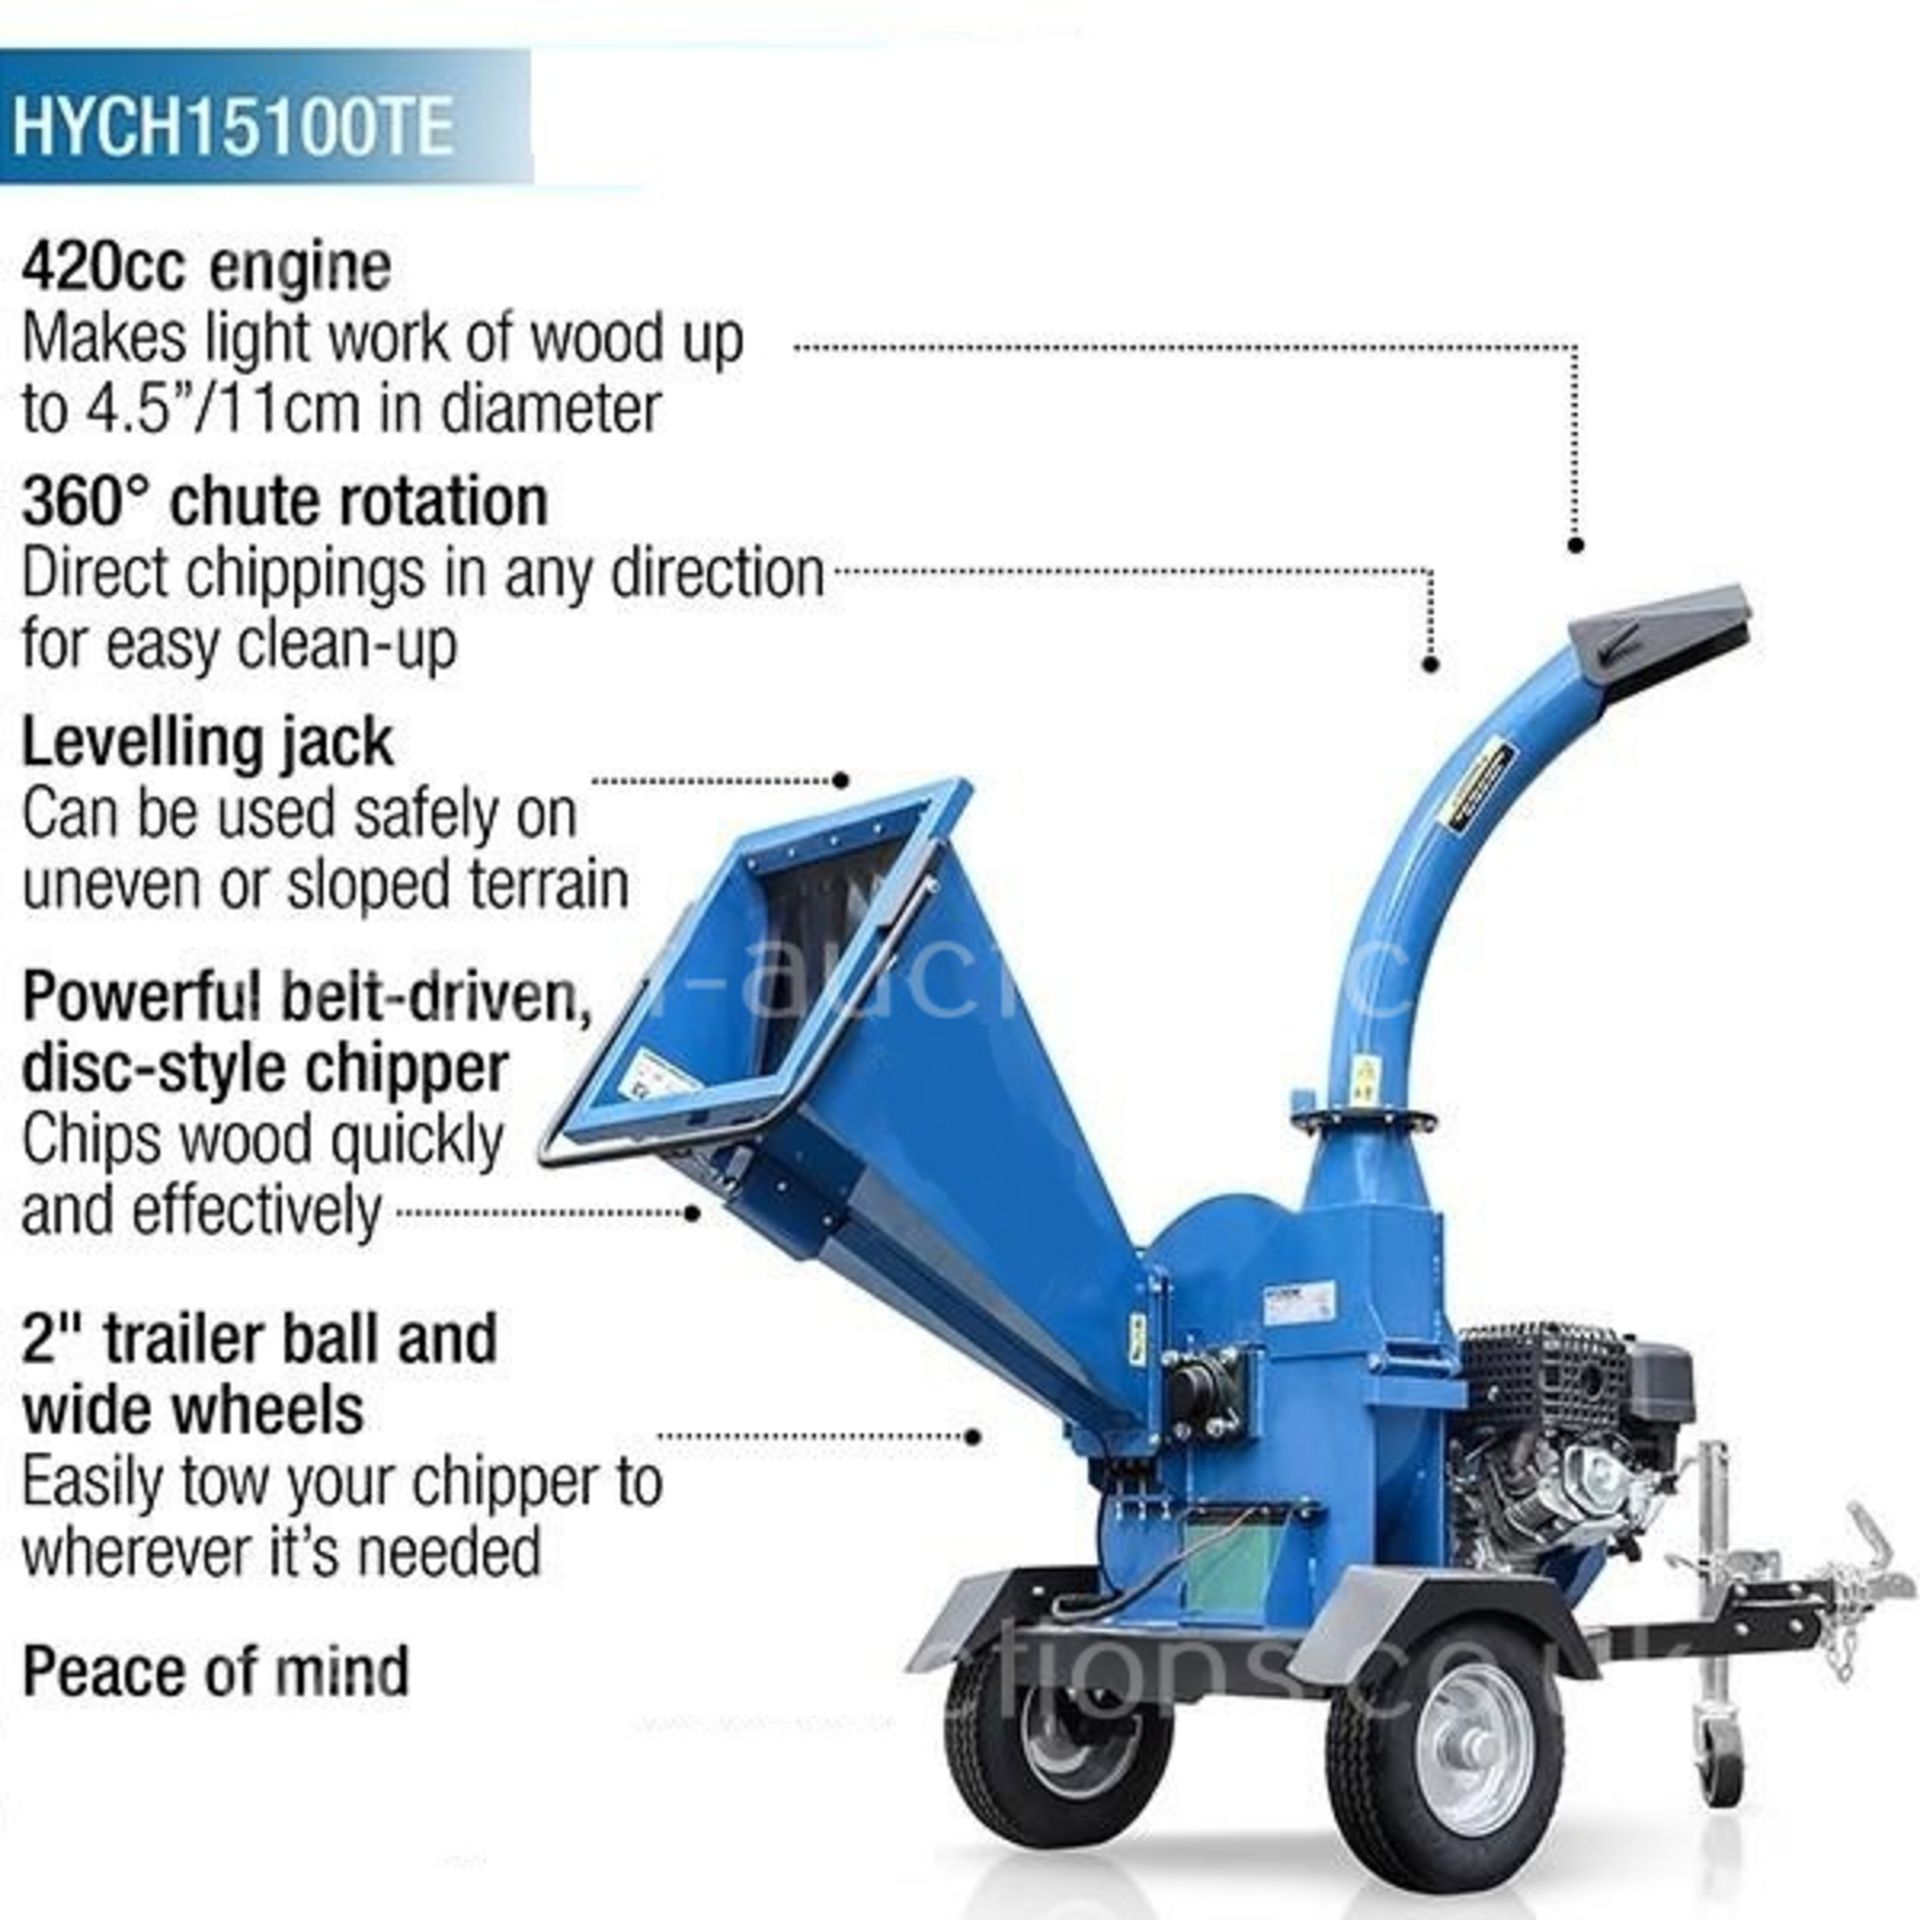 NEW AND UNUSED 15100TE 420cc 4.5" TOWABLE PETROL WOOD CHIPPER, RRP OVER £2400 *PLUS VAT* - Image 5 of 10